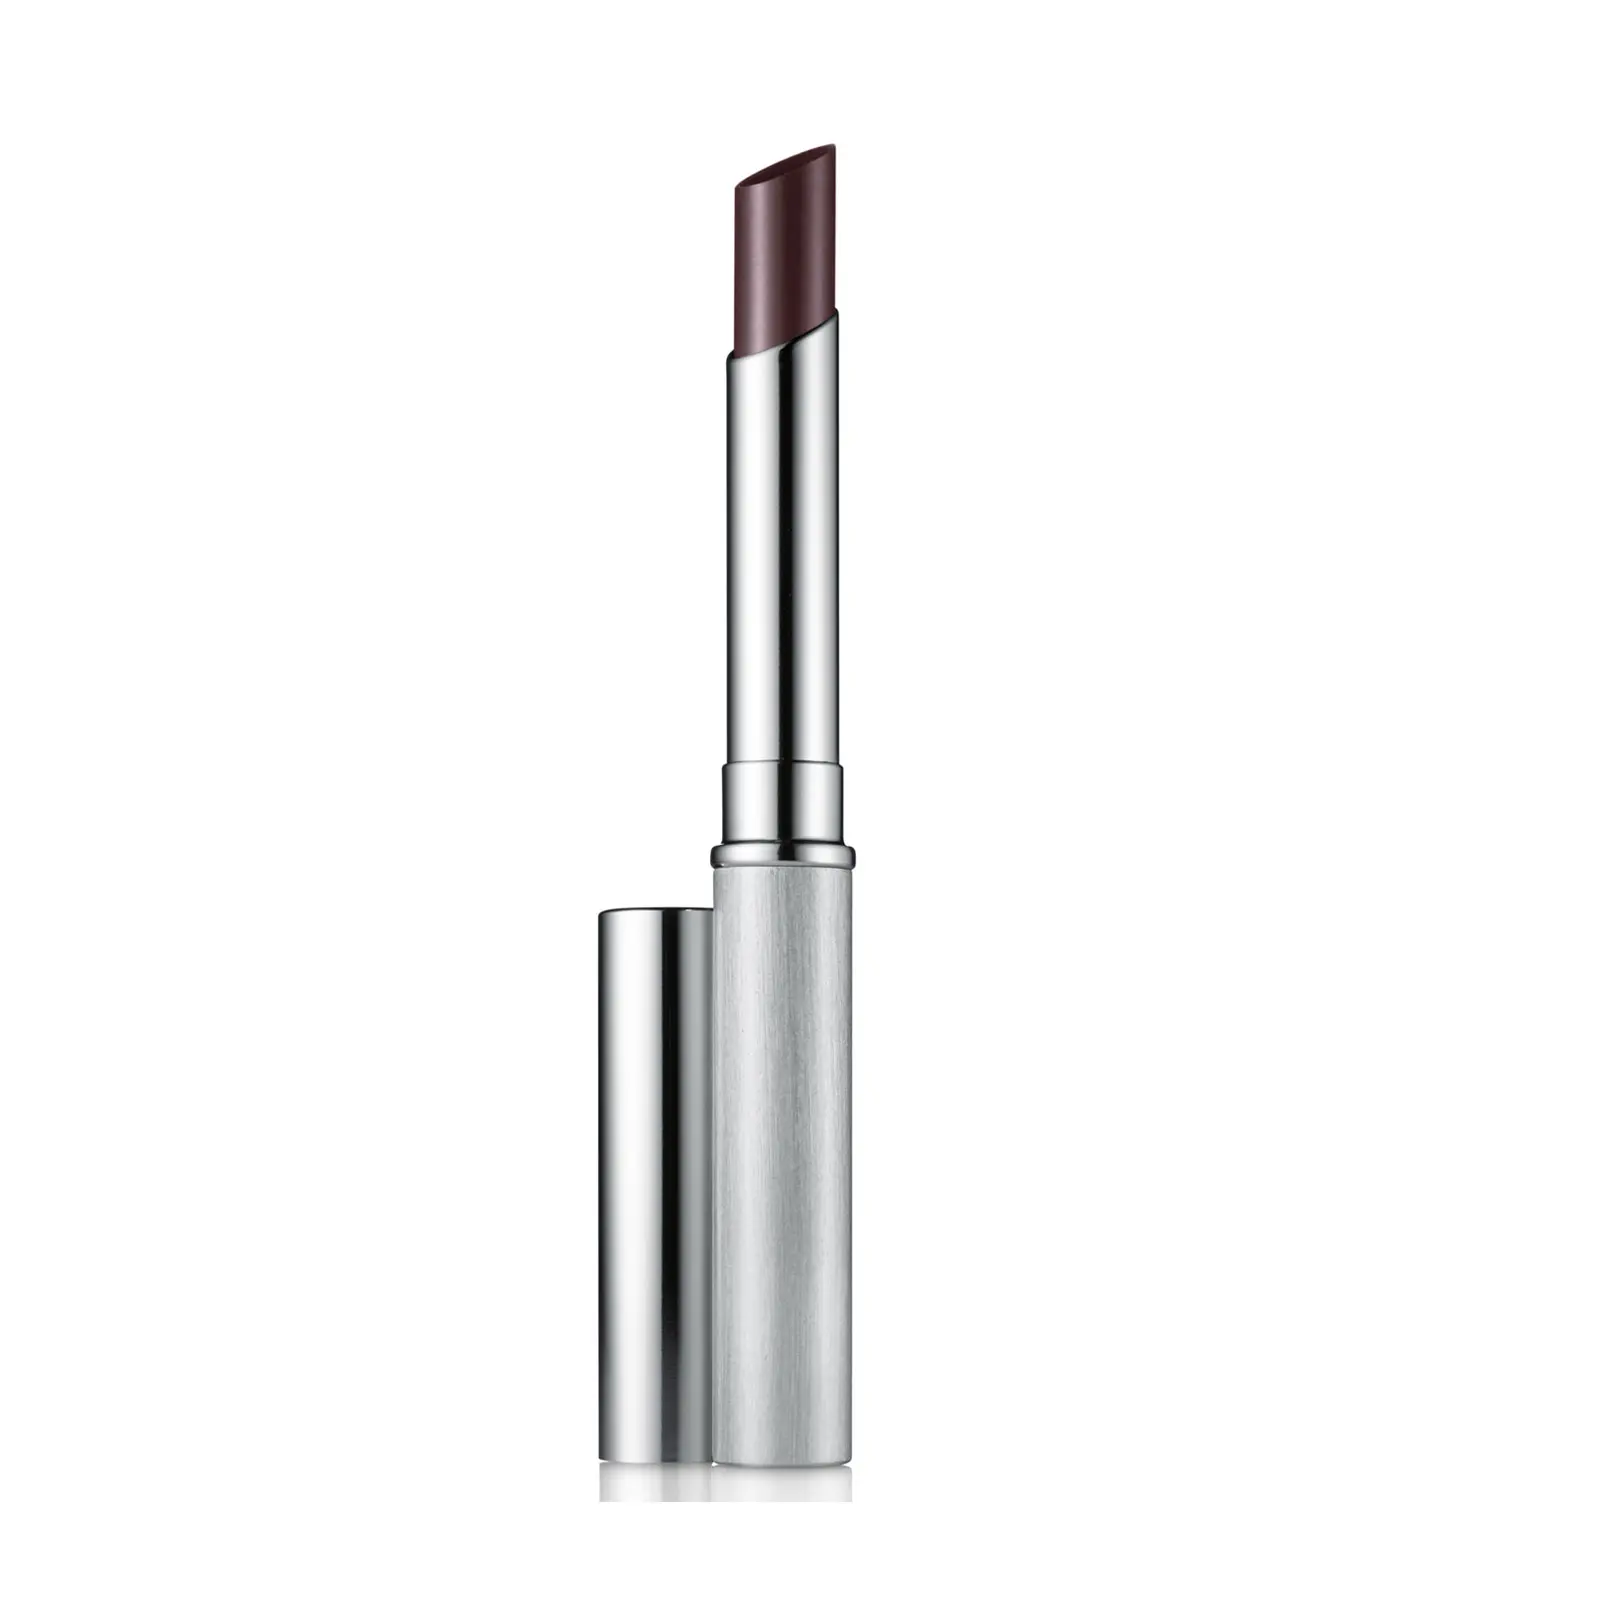 Clinique Almost Lipstick - Black Honey 1.9g Discounts and Cashback